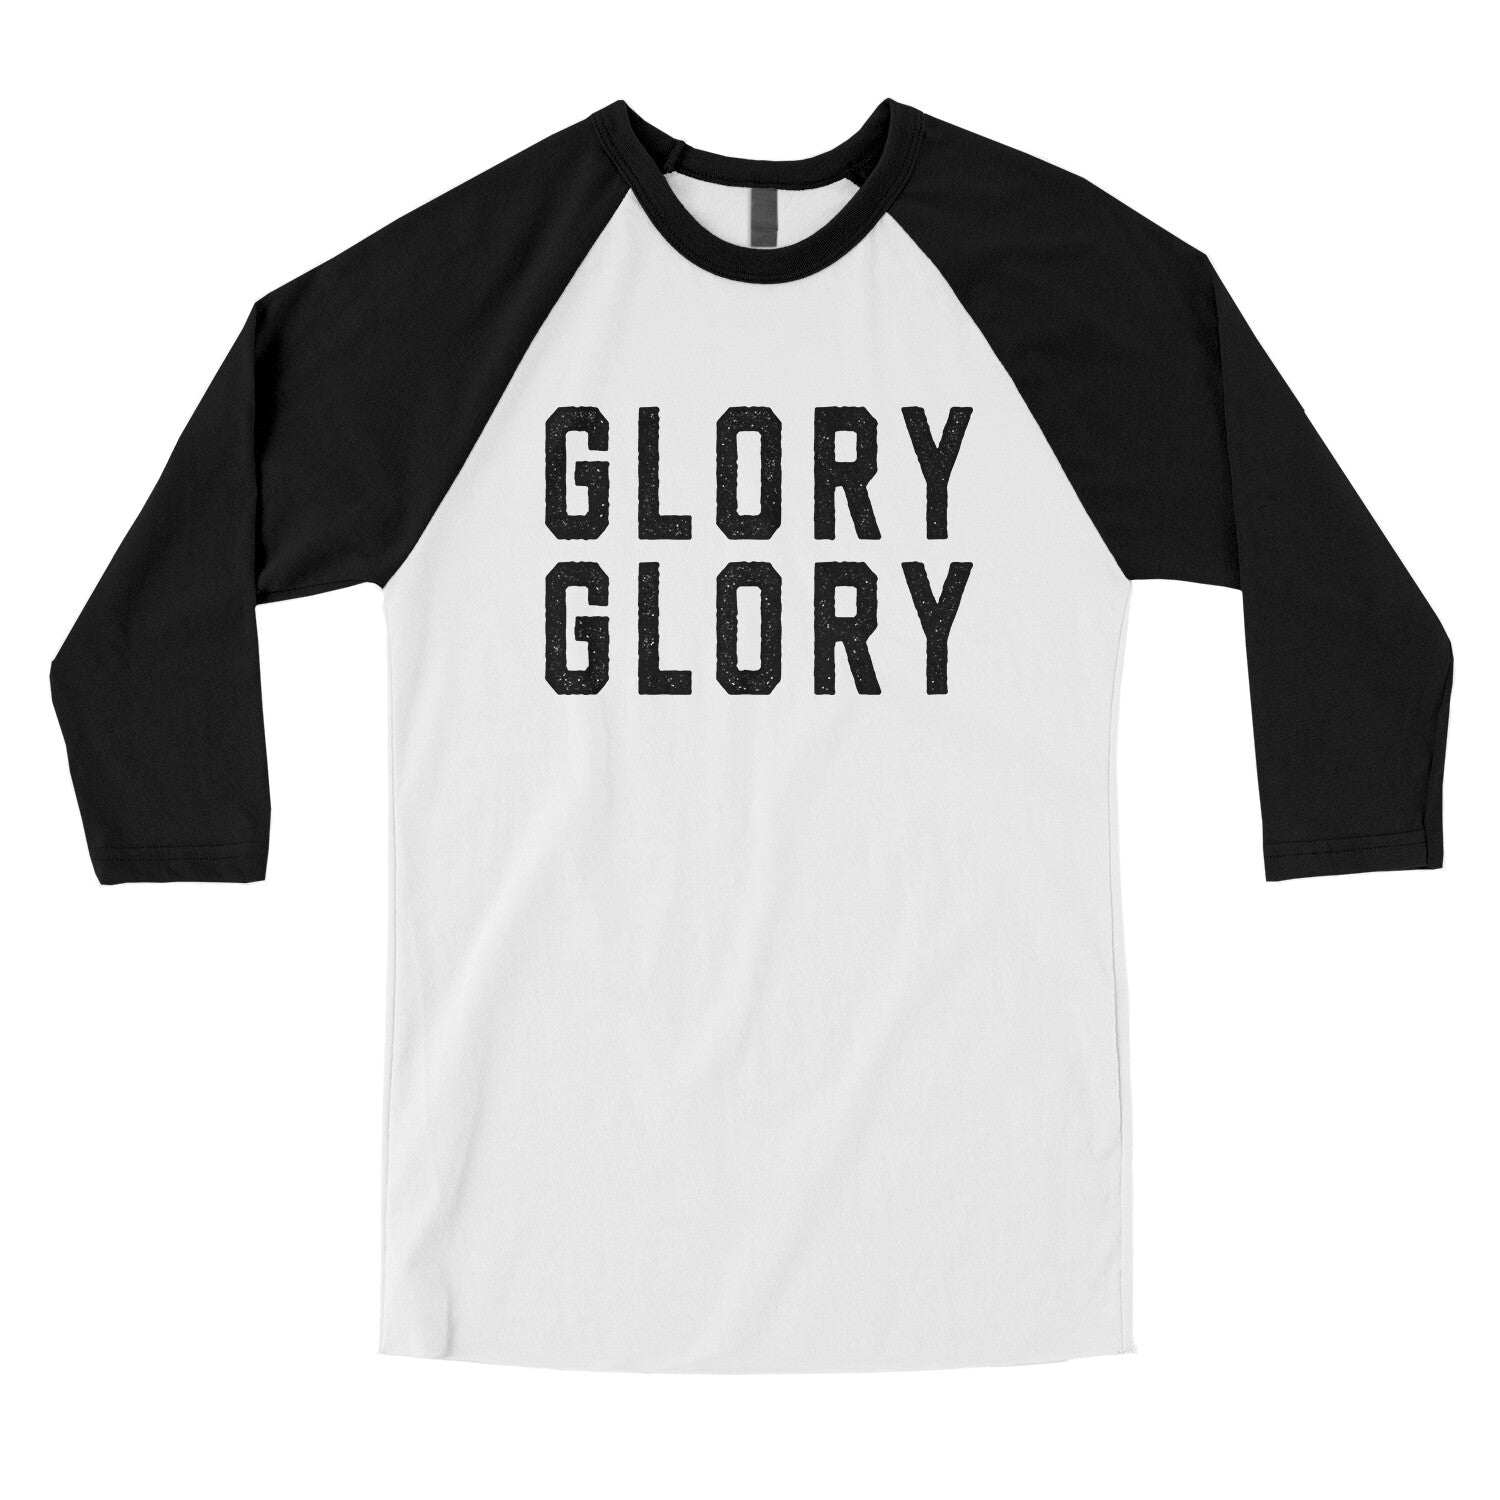 Glory Glory in White with Black Color